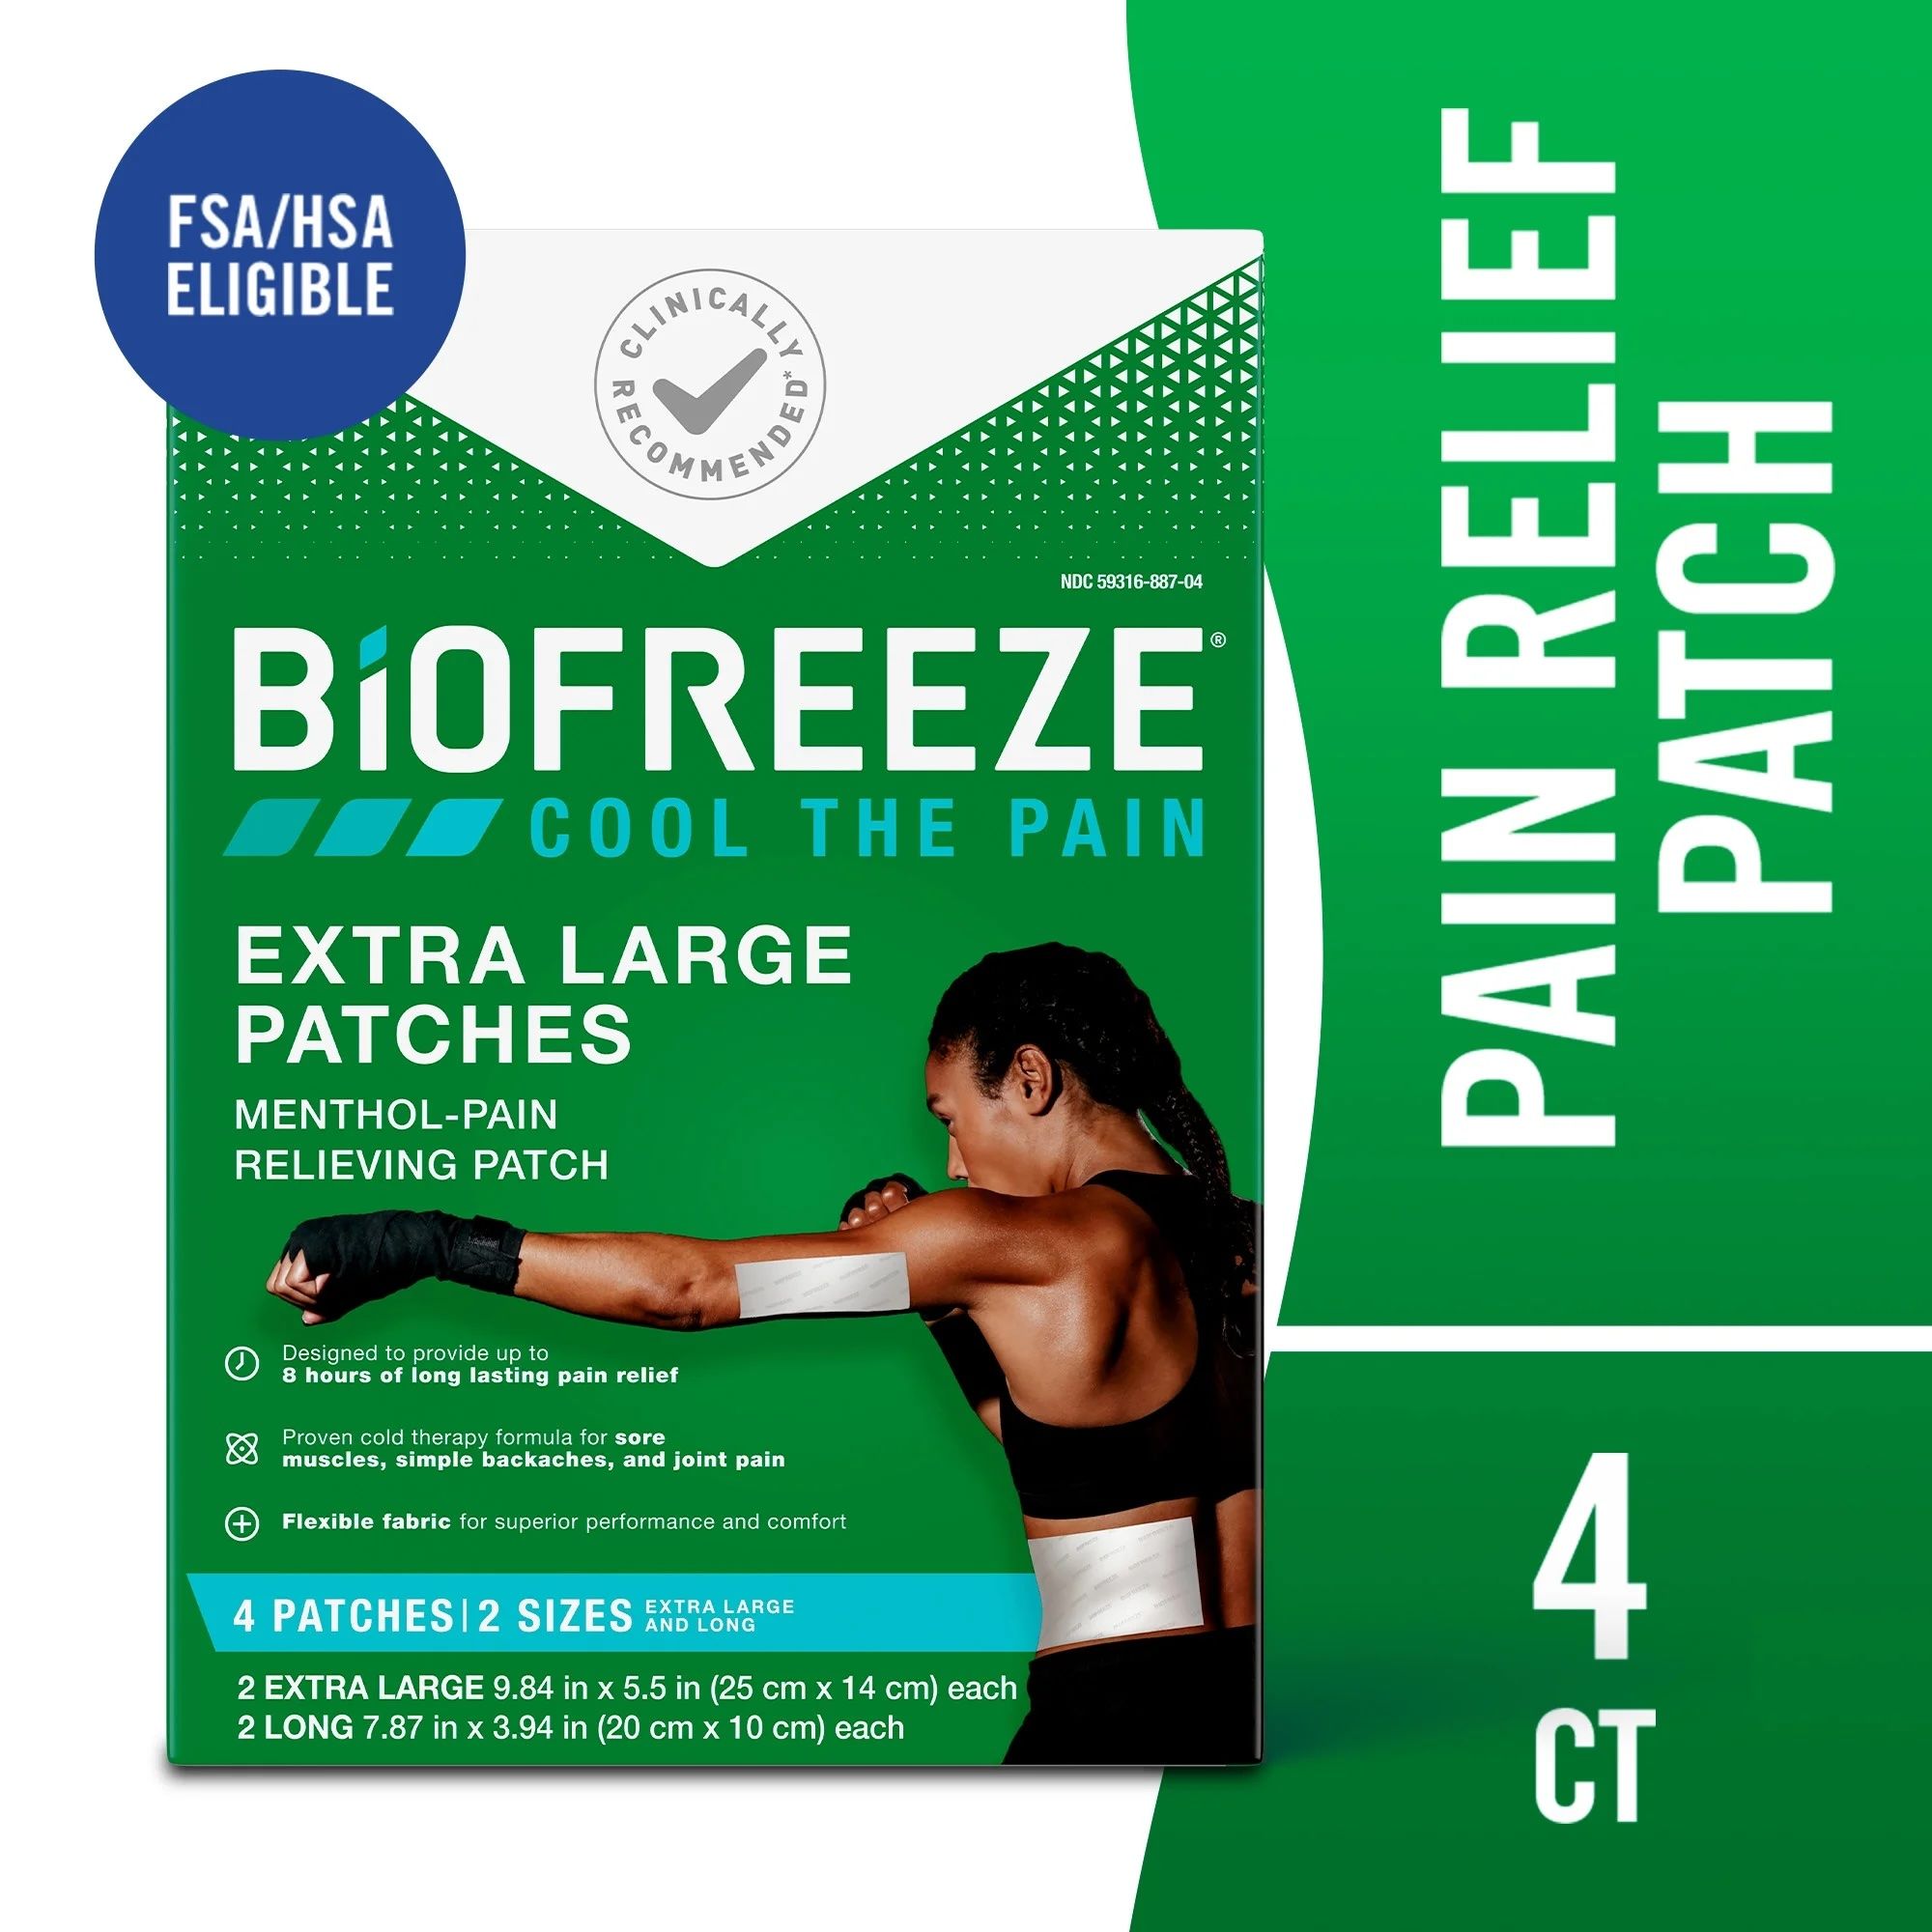 Biofreeze Topical Pain Relief Patches, Extra Large - 4 patches